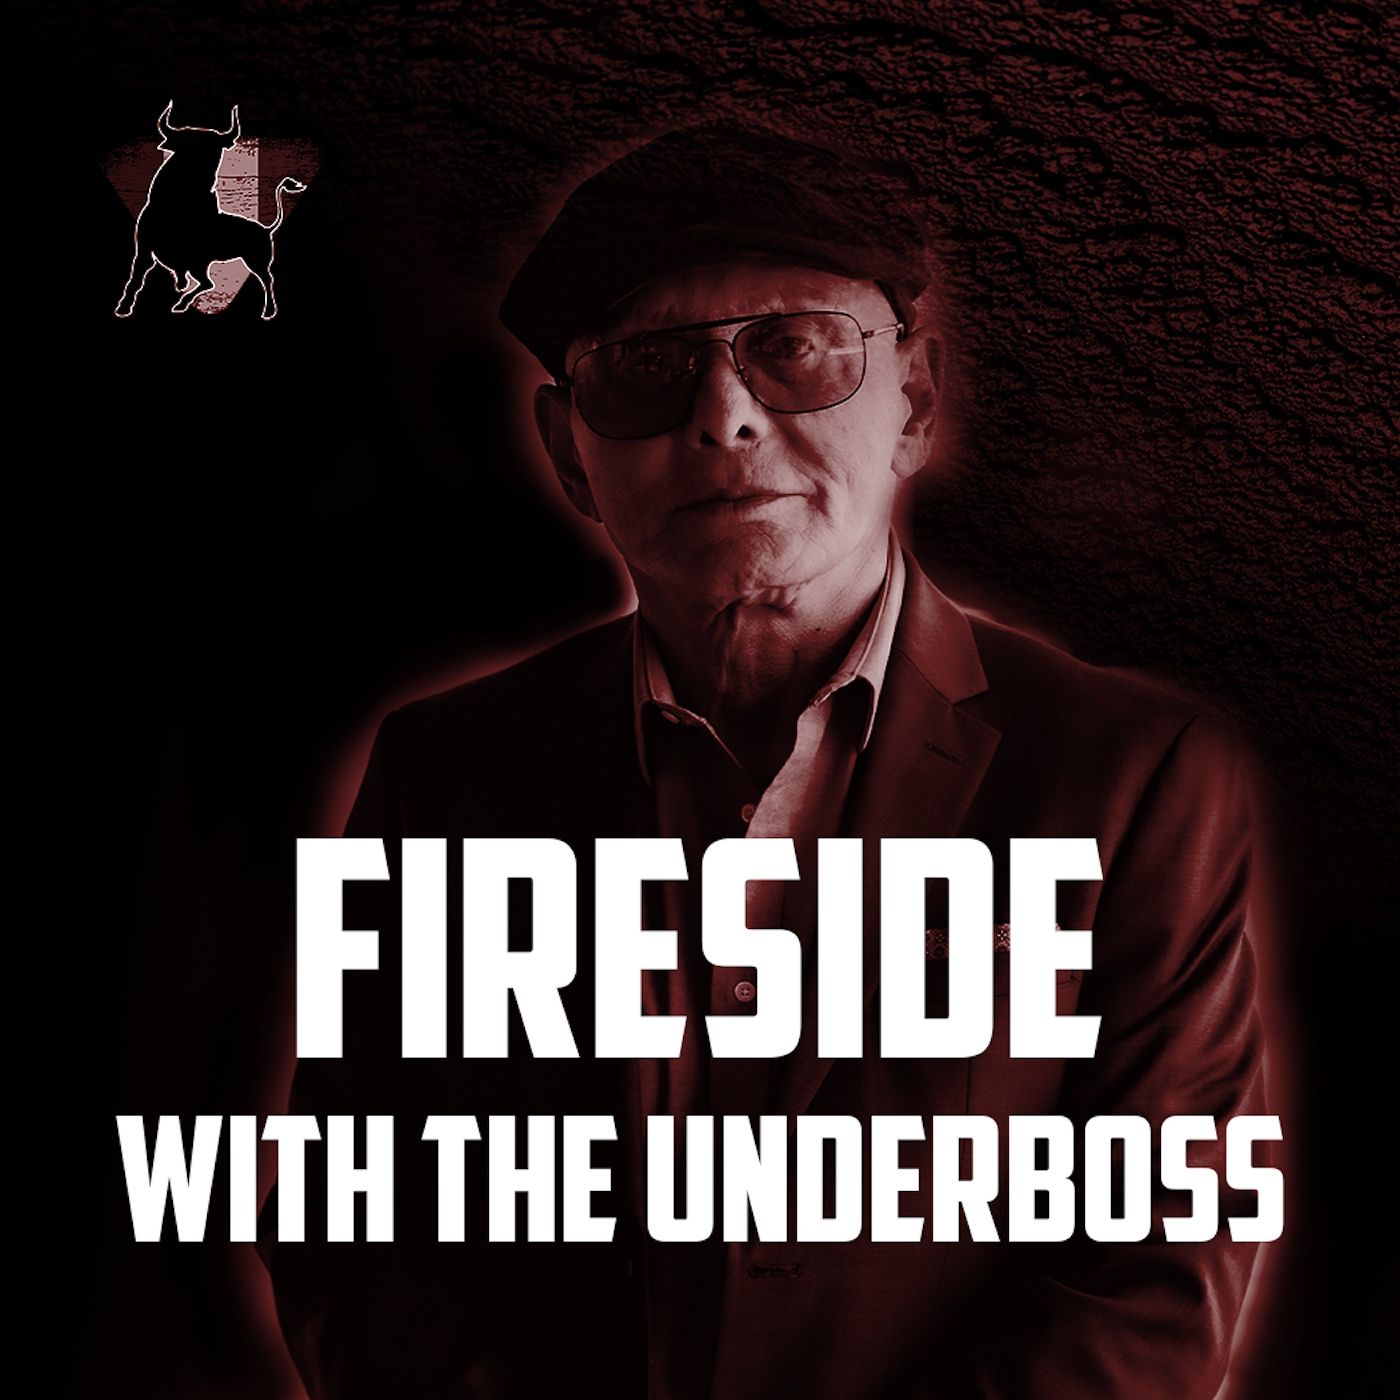 Fireside With The Underboss – ”He's A Killer Some Of Us Will End Up In The Trunk Of A Car”